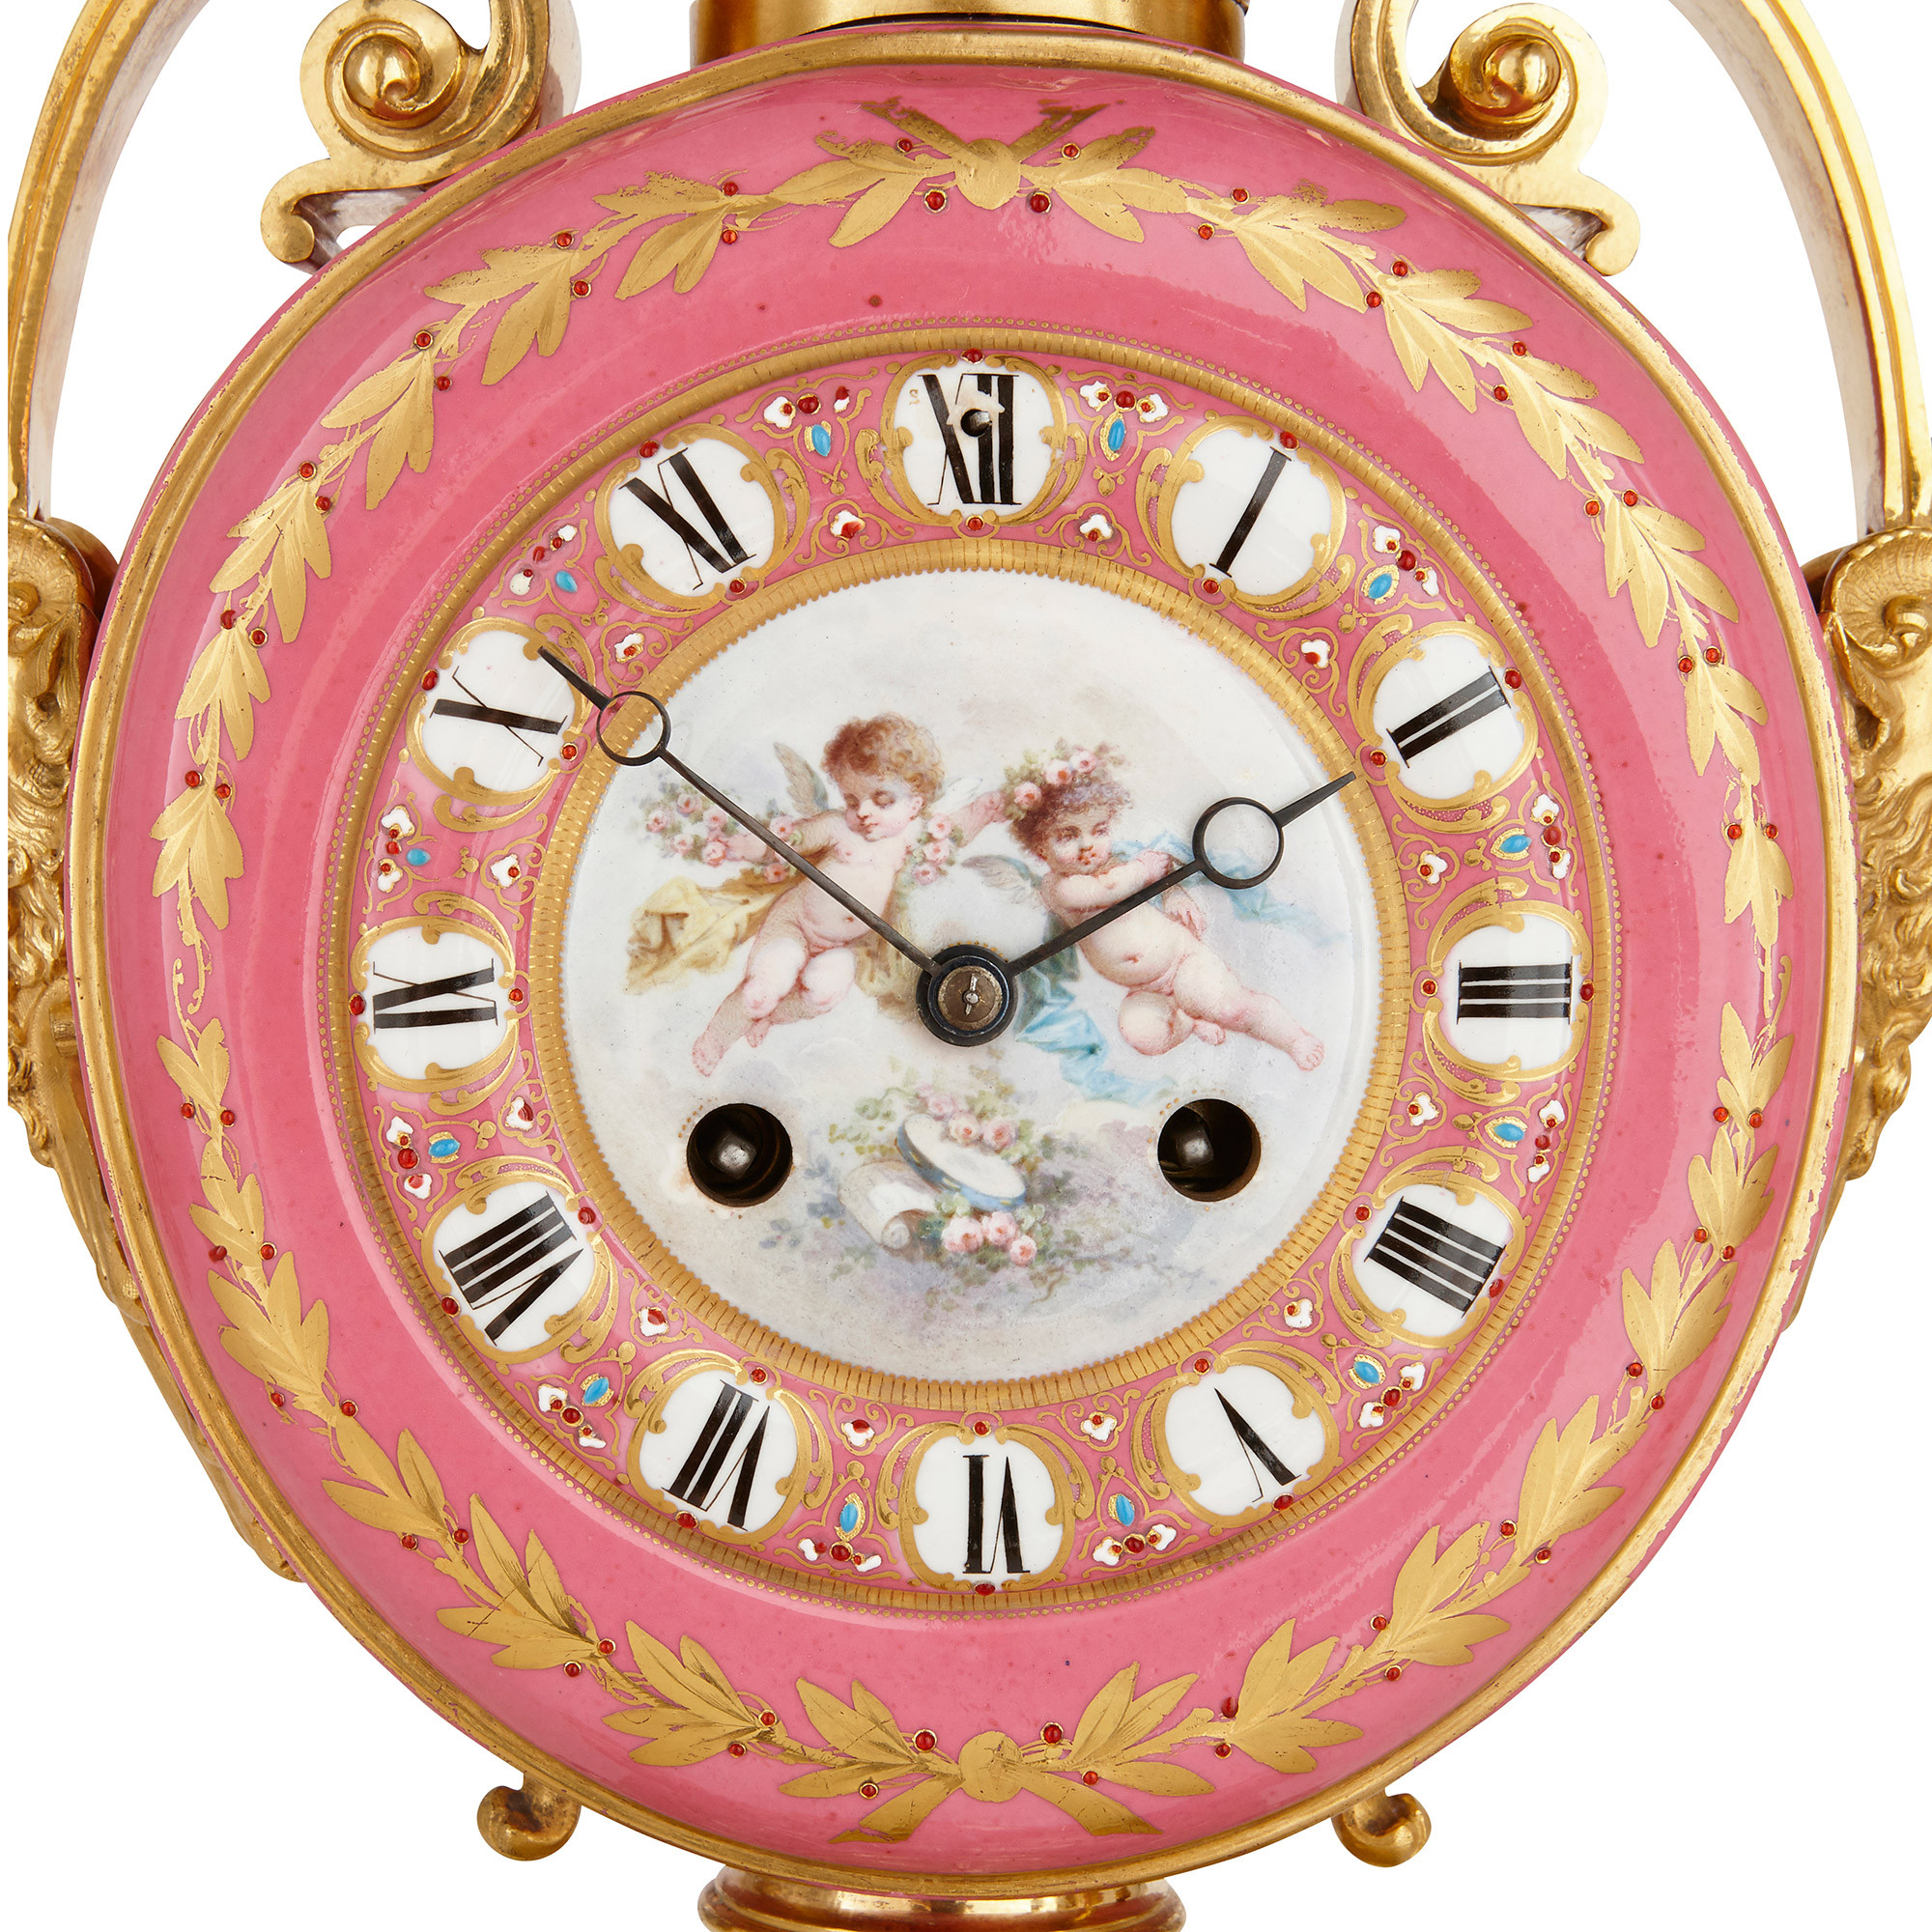 Sèvres style pink porcelain and ormolu antique French clock set ...